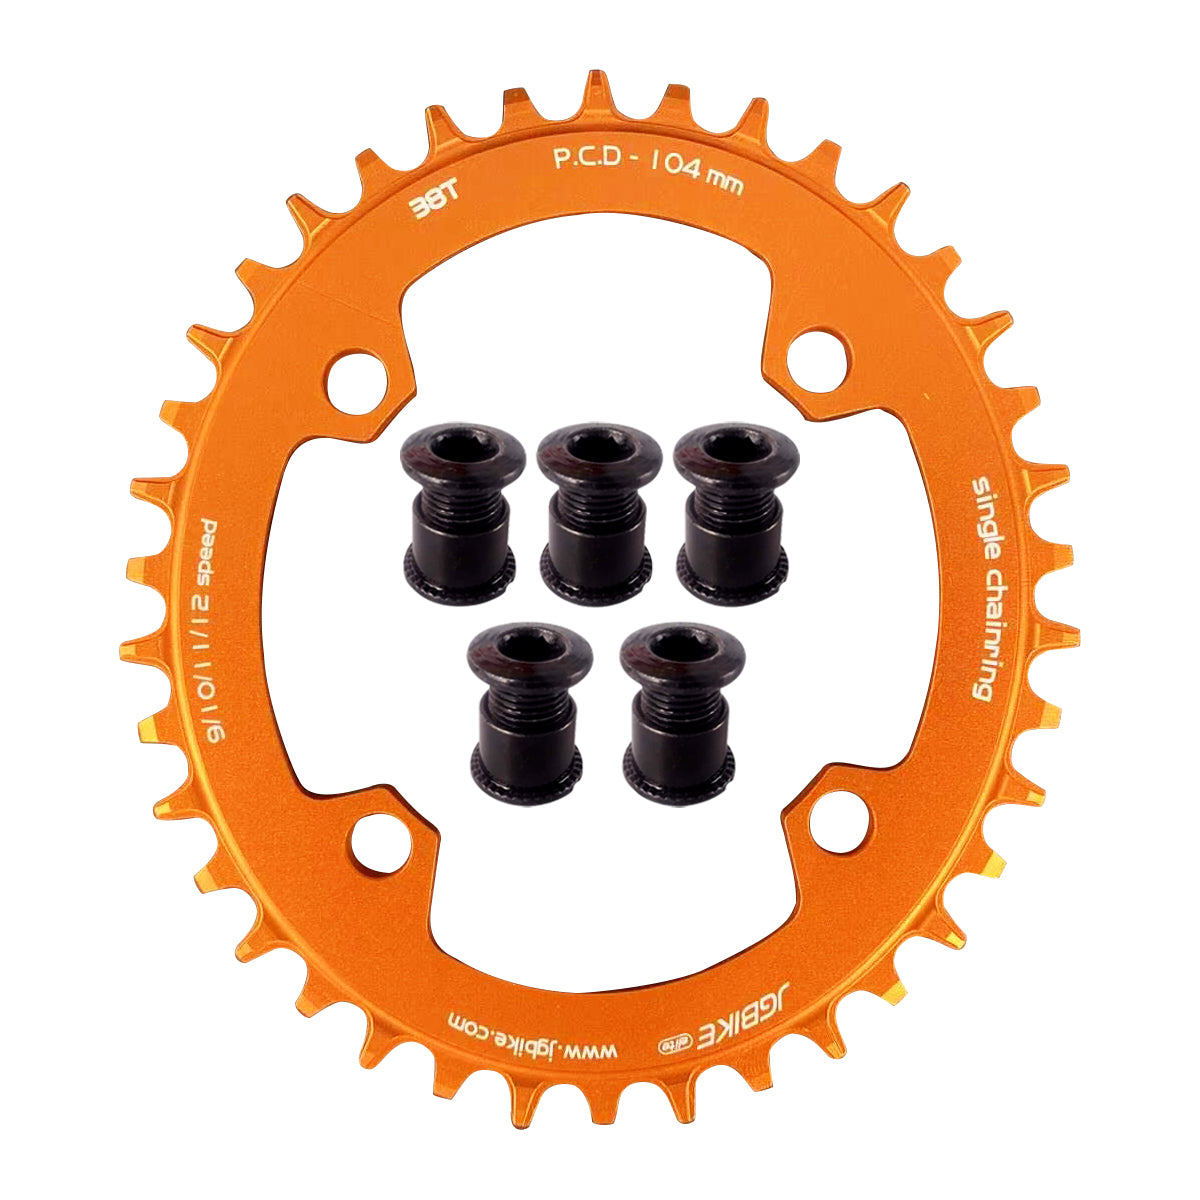 JGbike Round Oval Chainring 104mm BCD Narrow Wide for 8 9 10 11 12 Speed MTB XC Trail Mountain Bike Bicycle